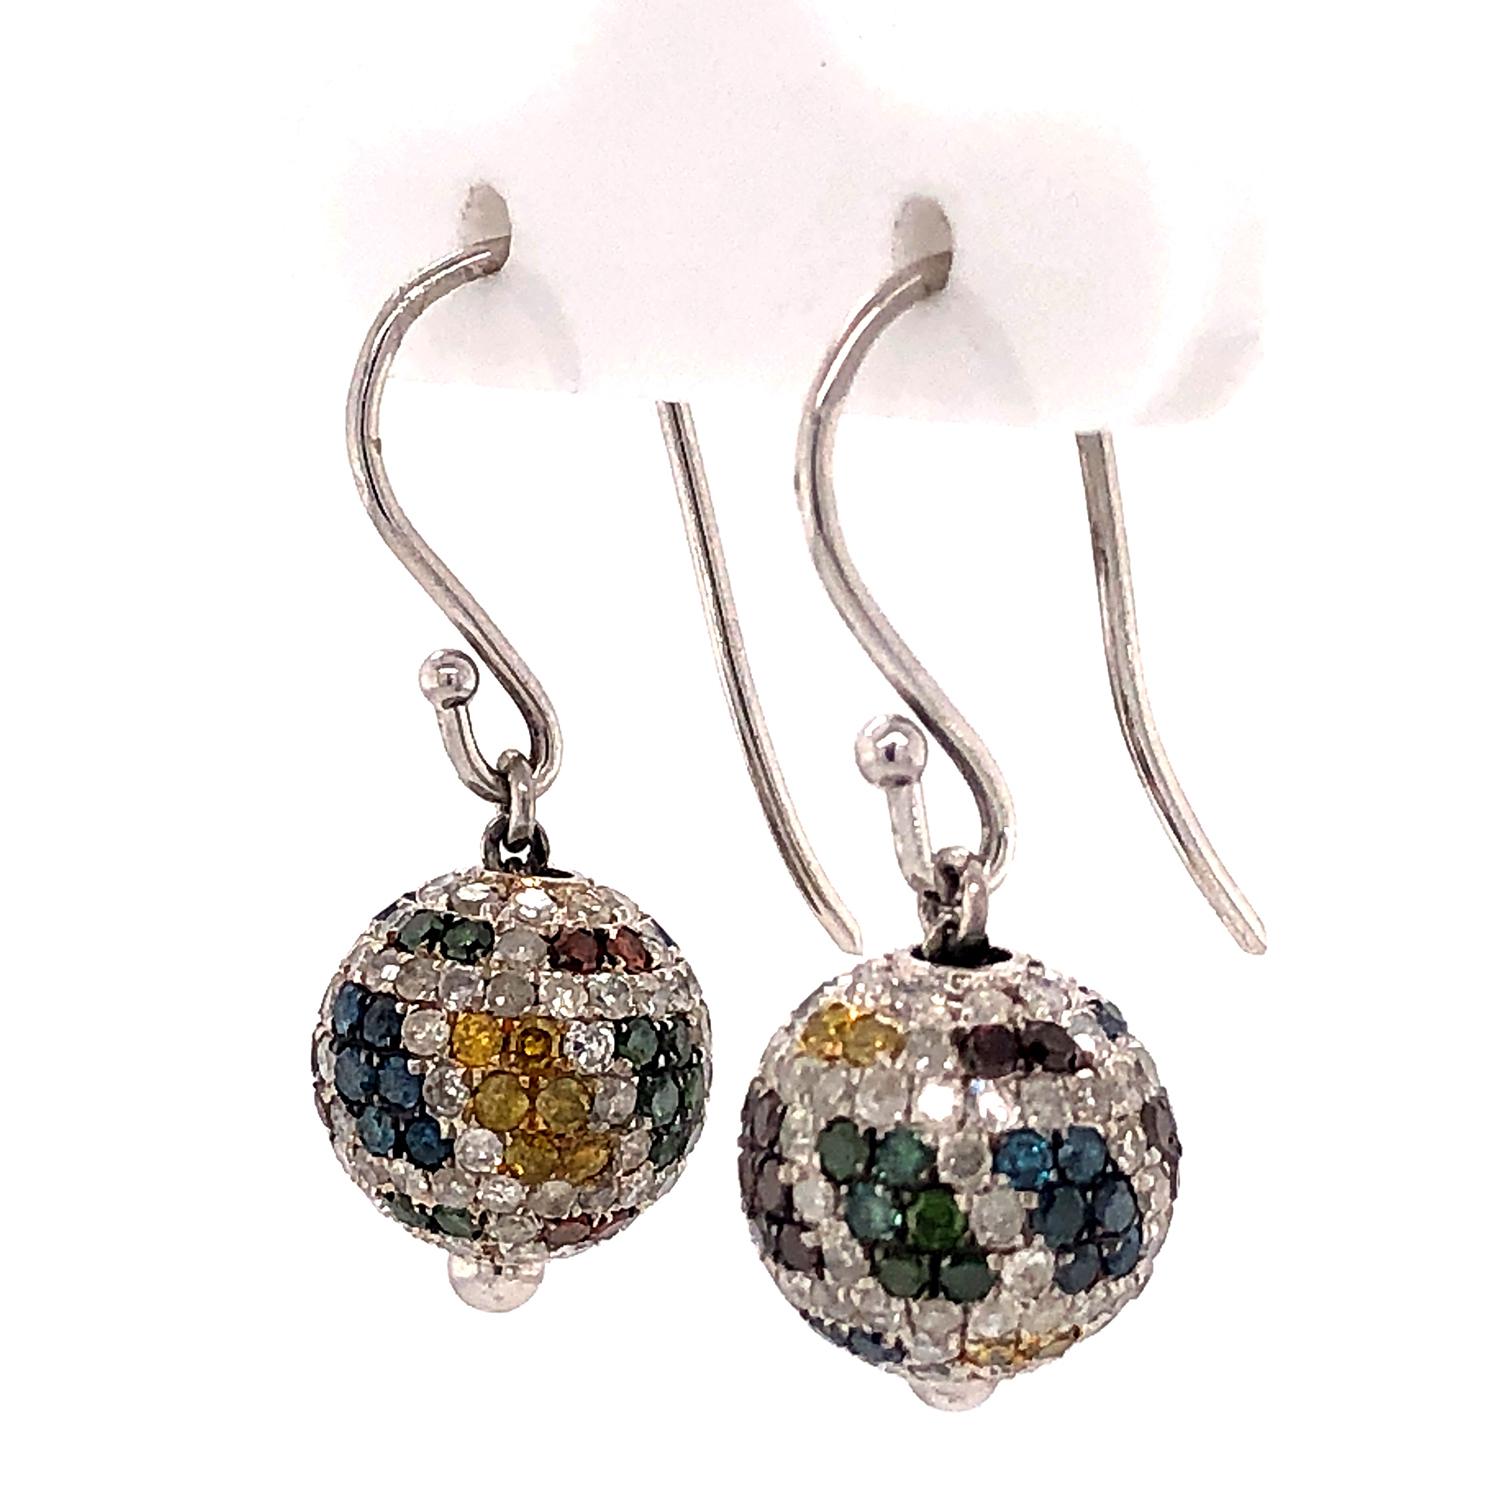 Ranibow Color Themed Pave Diamonds Ball Earrings Made In 14kt Gold & Silver In New Condition For Sale In New York, NY